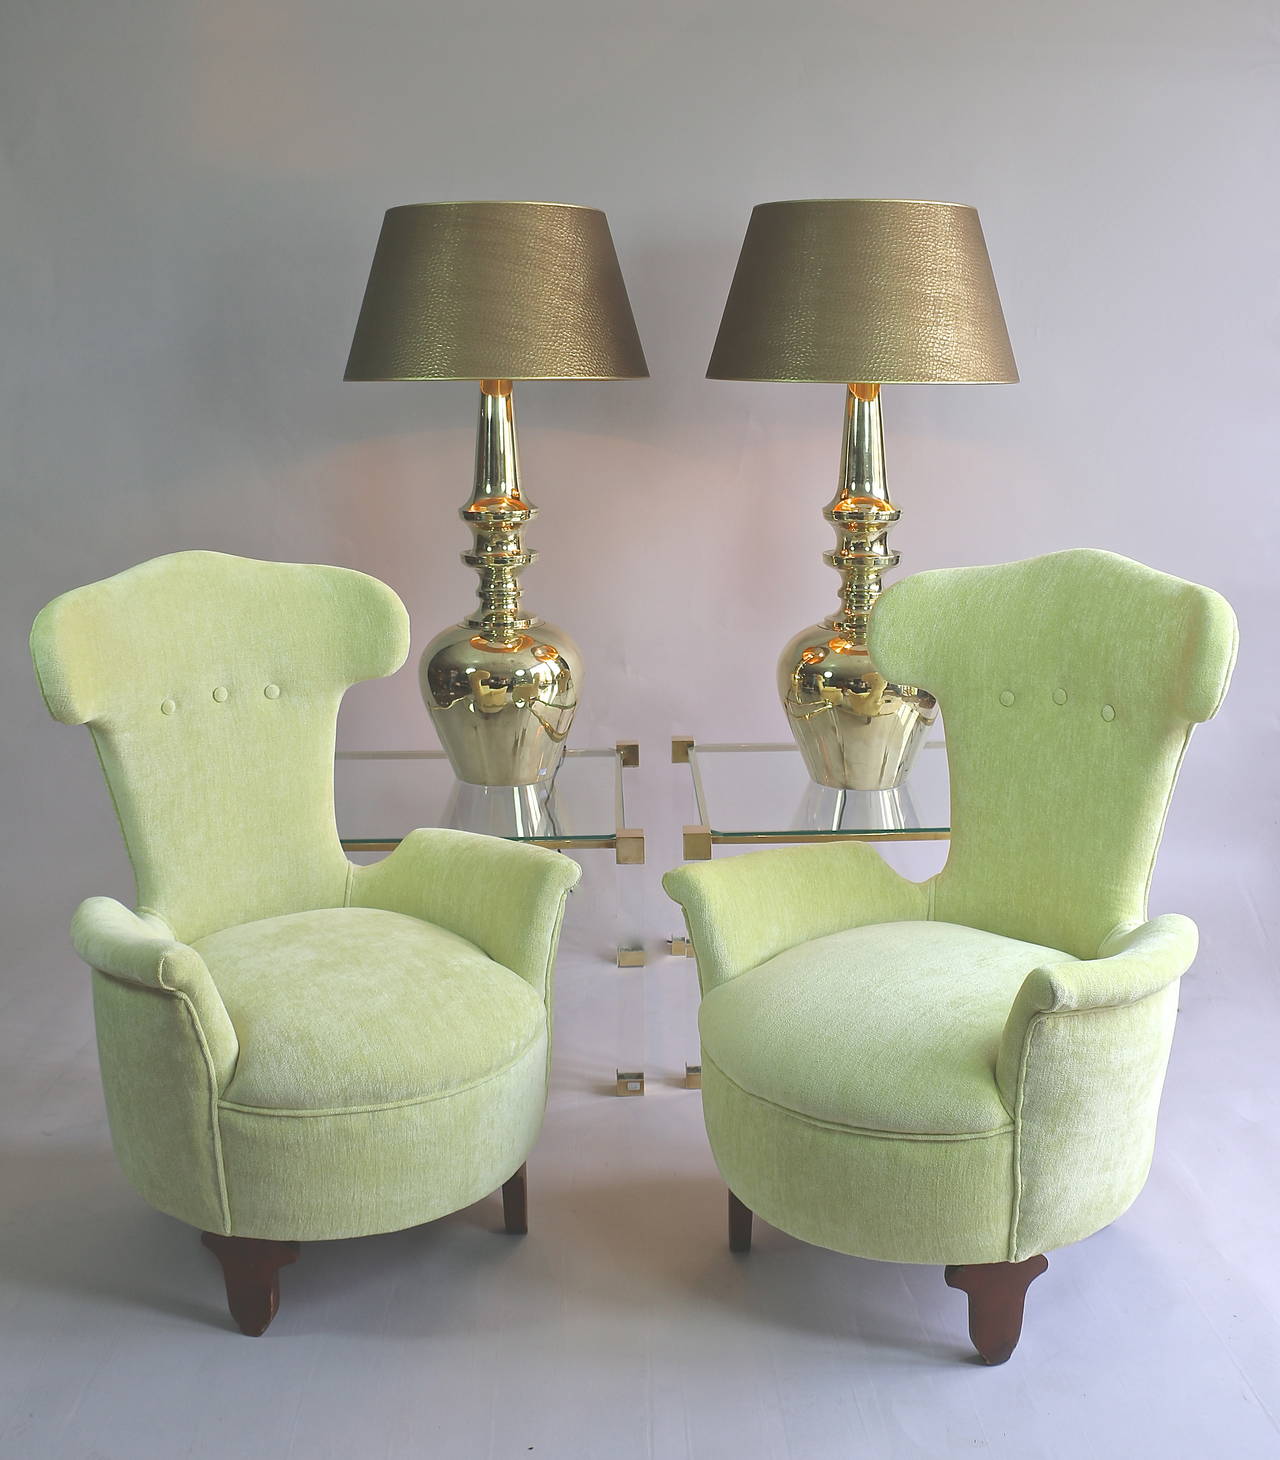 1950s pair of small Italian armchairs covered by a Rubelli fabric, circa 1950.